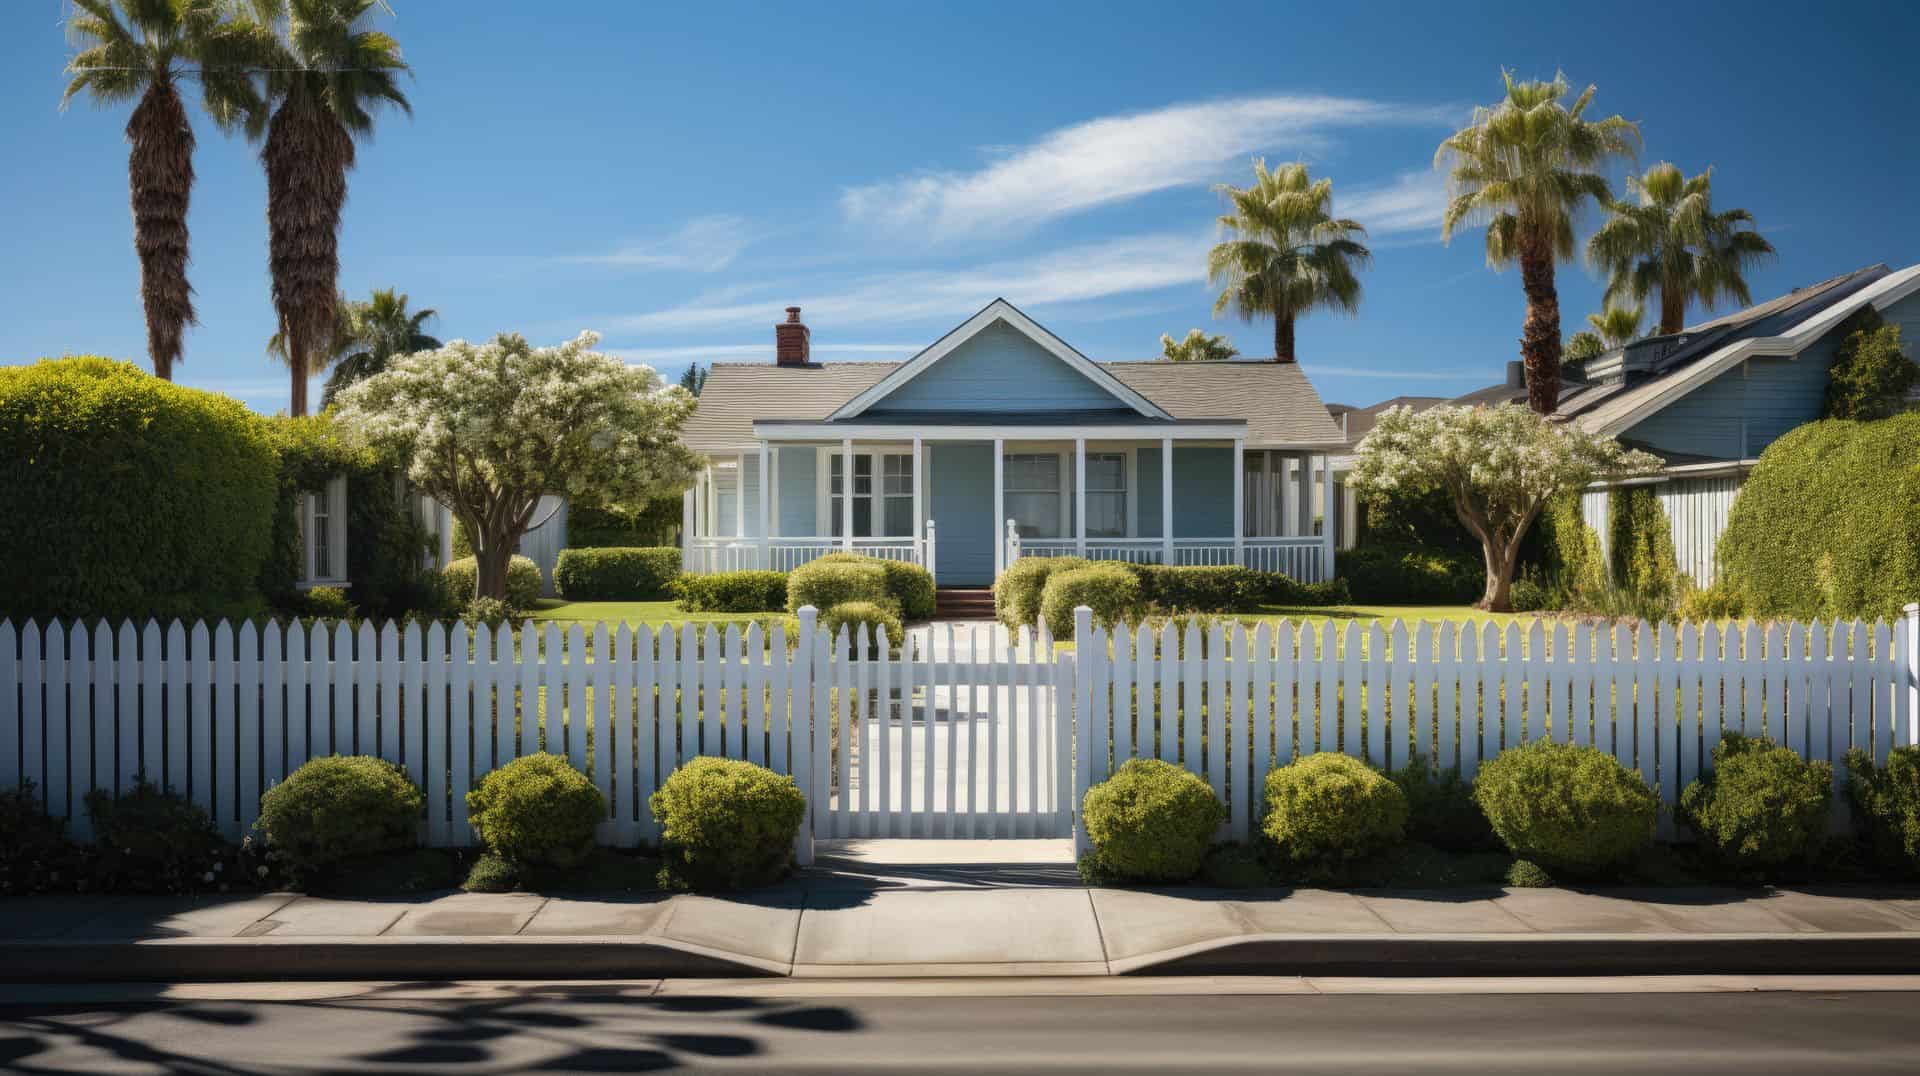 All About Picket Fences - This Old House